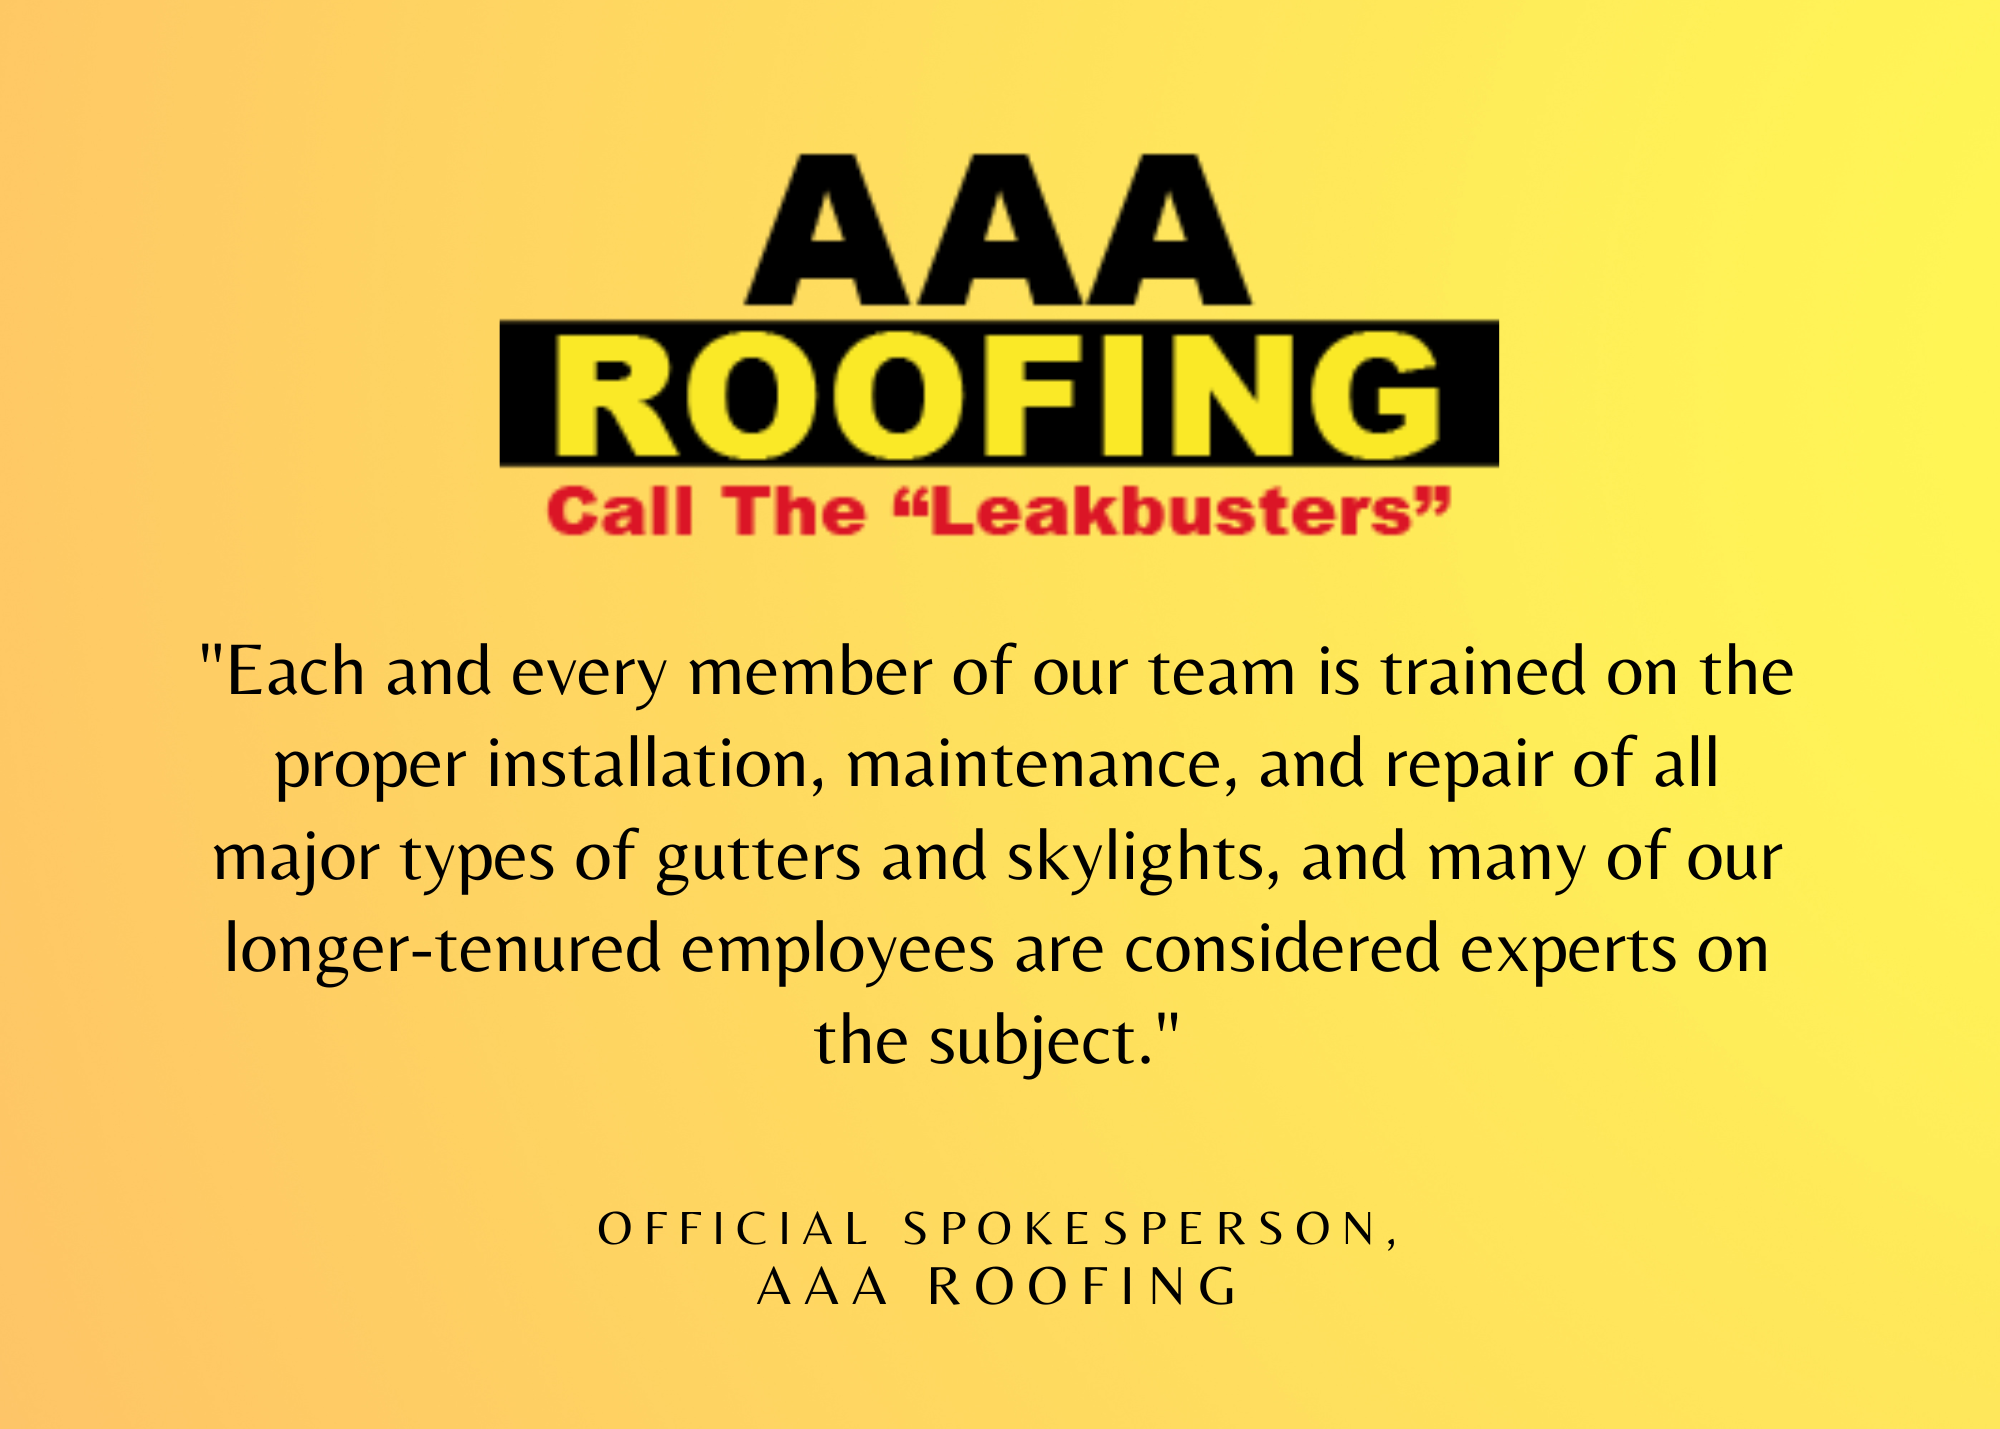 AAA Roofing, Monday, December 12, 2022, Press release picture